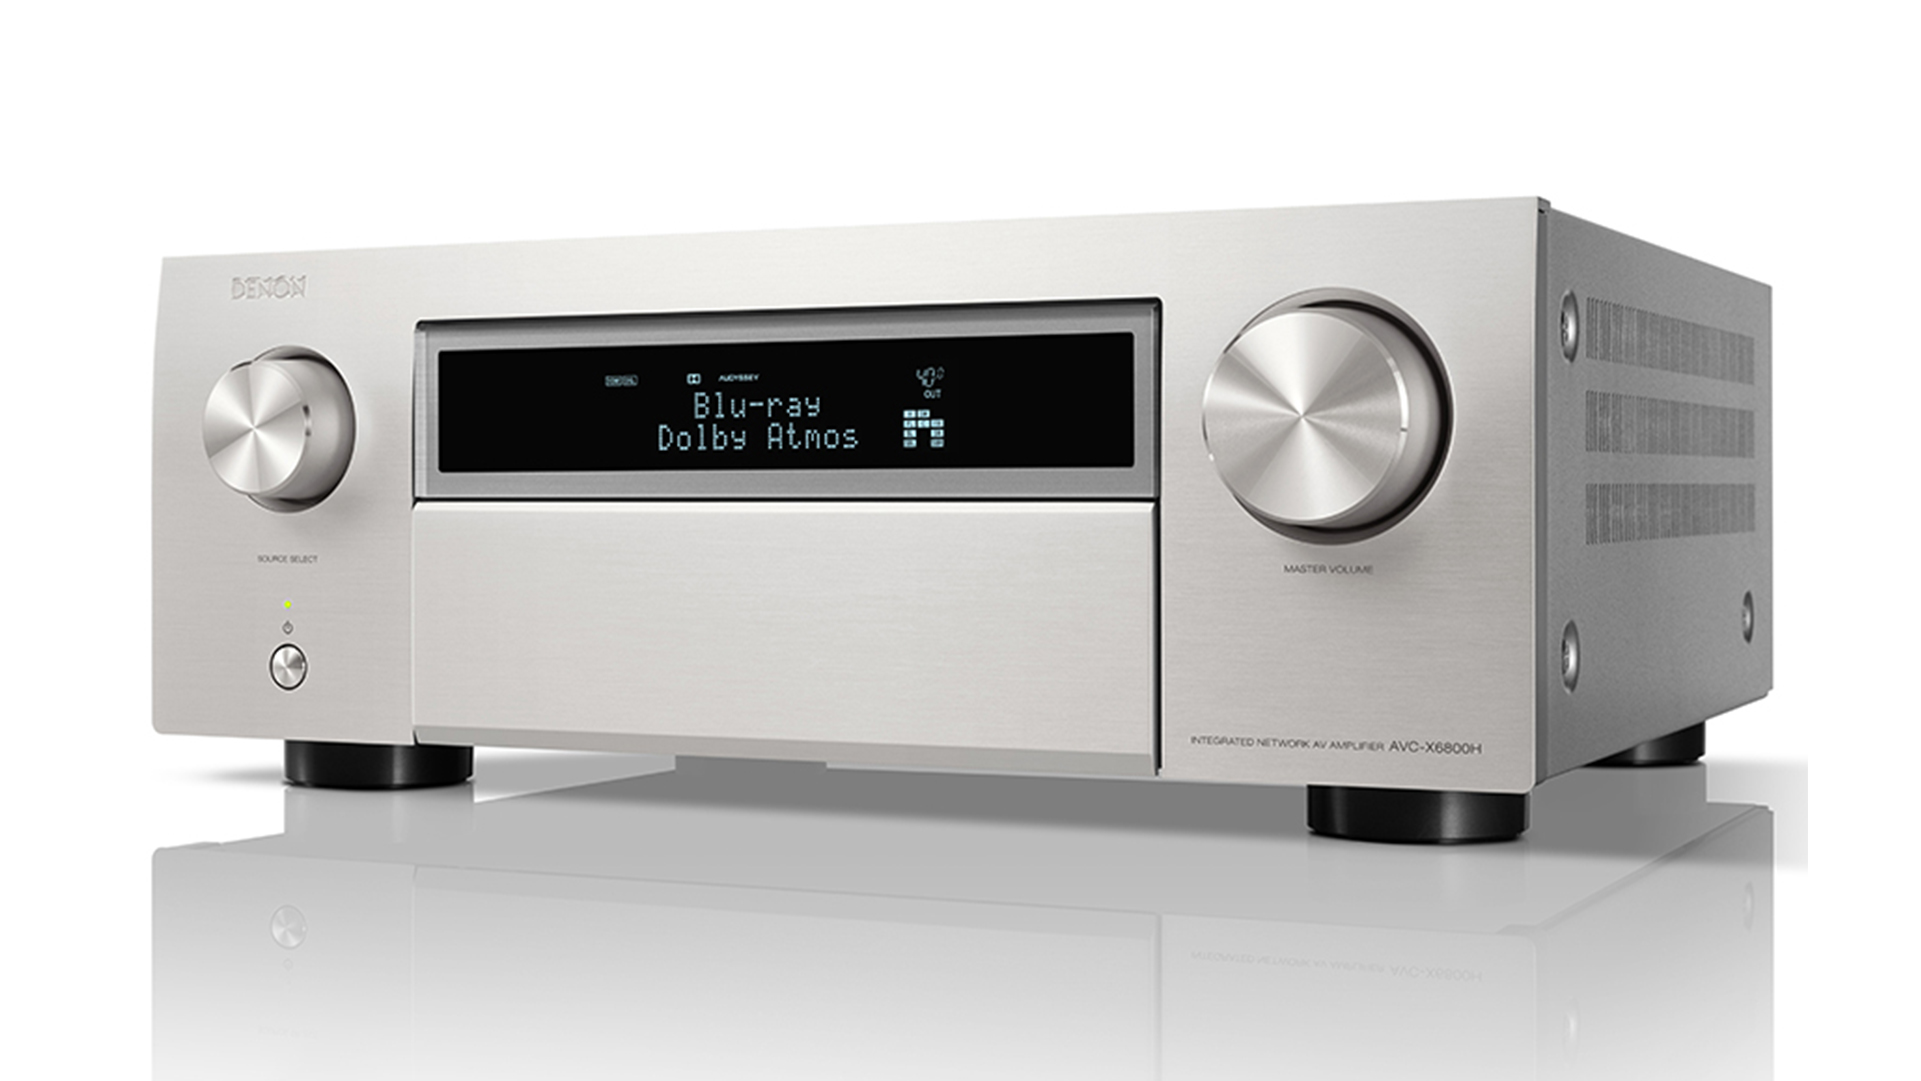 5 crucial tips and tricks to help you get the most out of your Denon AVR